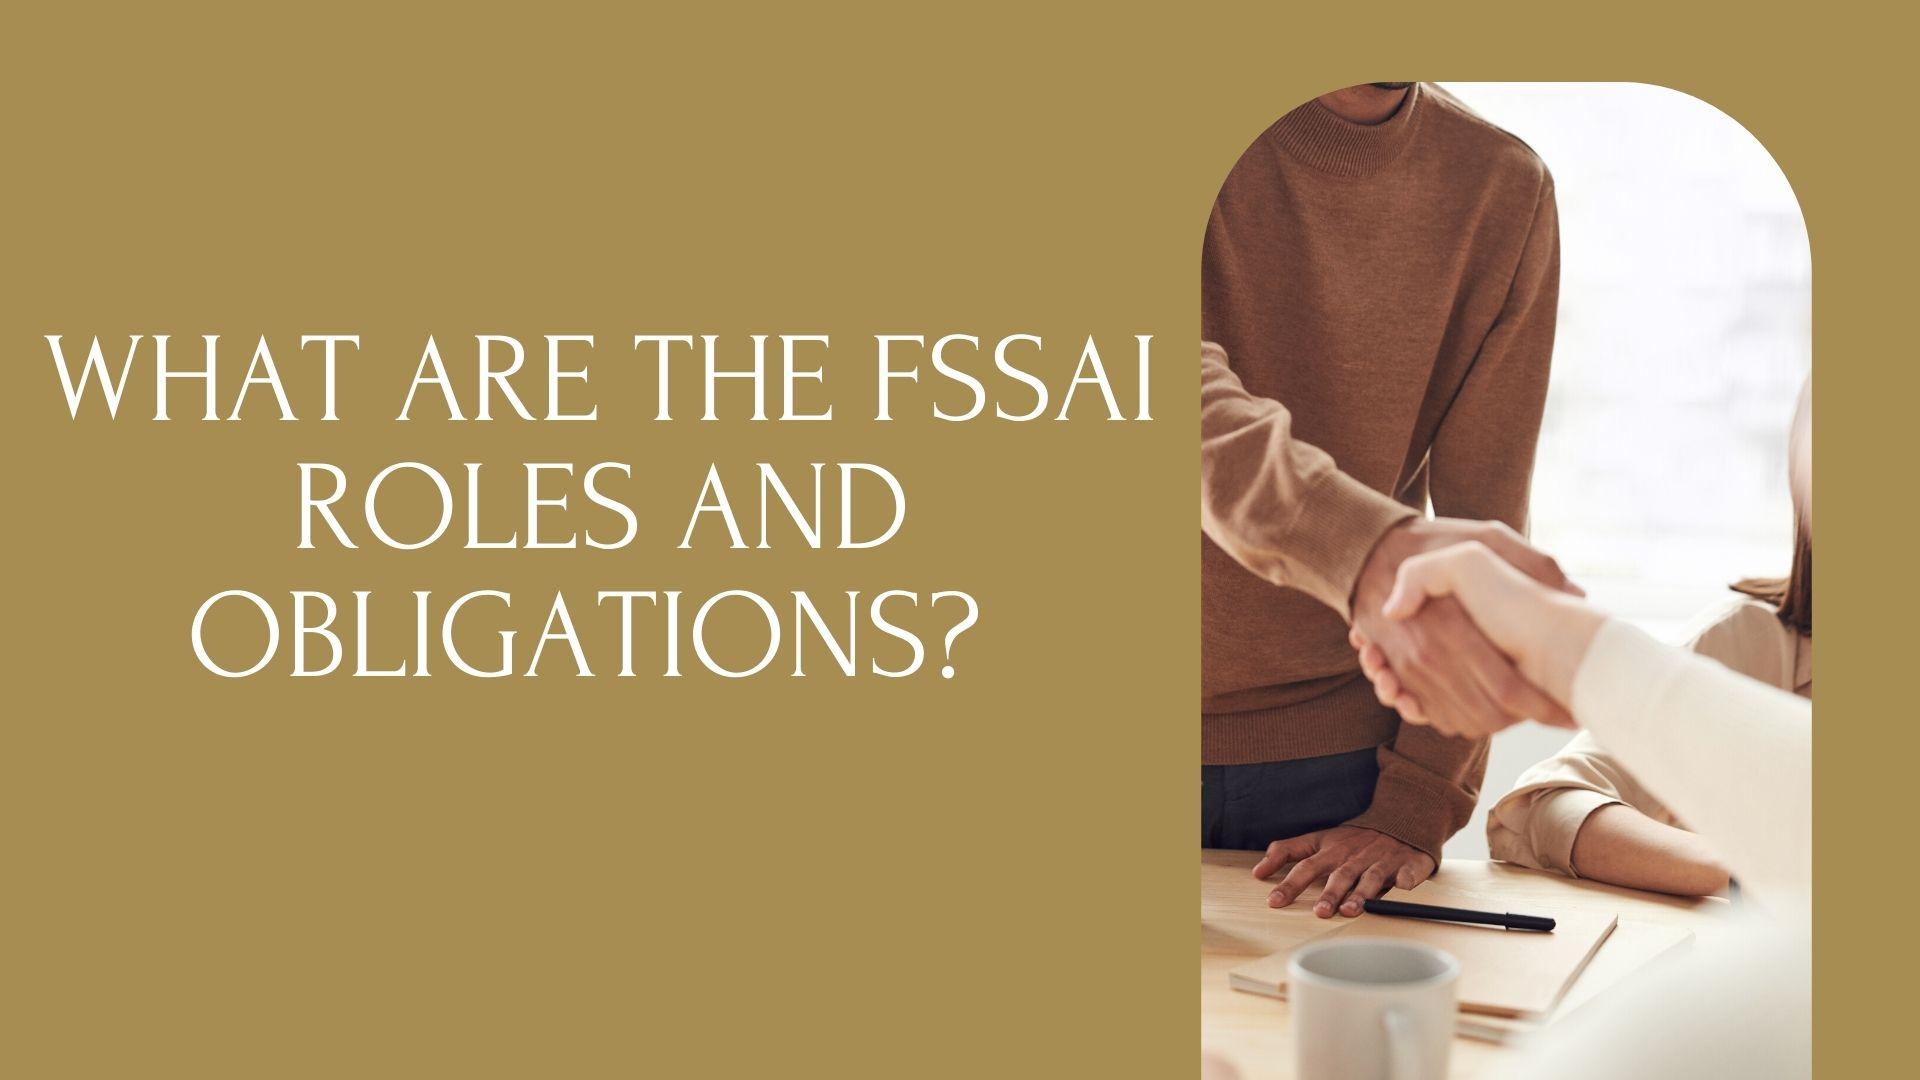 What are the fssai roles and obligations